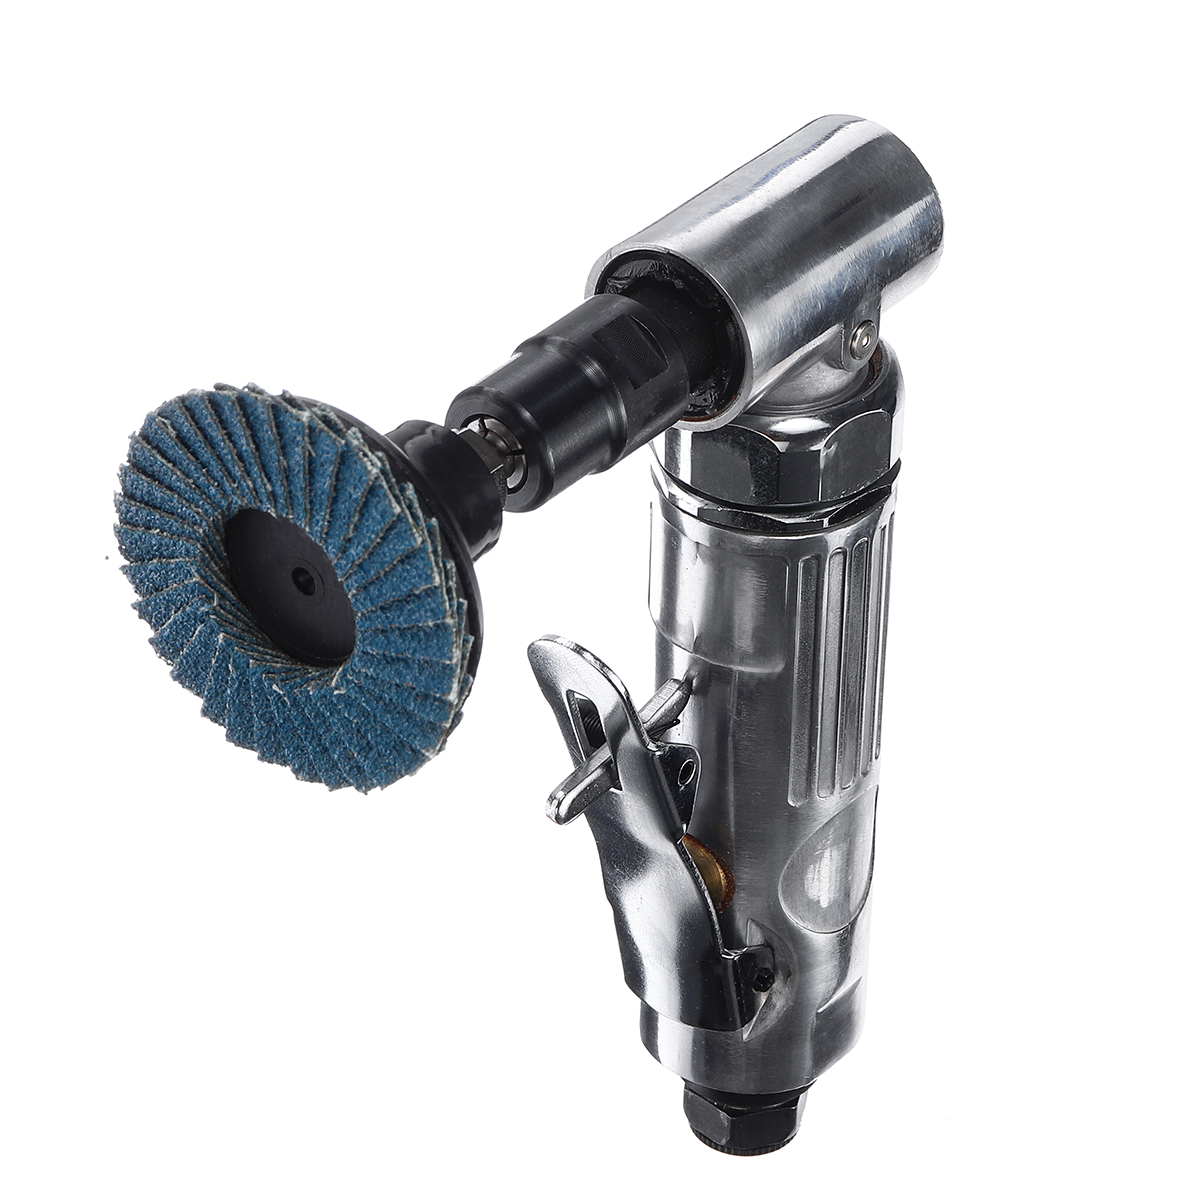 14-Inch-Air-Angle-Die-Grinder-90-Degree-Pneumatic-Grinding-Machine-Mini-Tool-Cutter-1645724-4